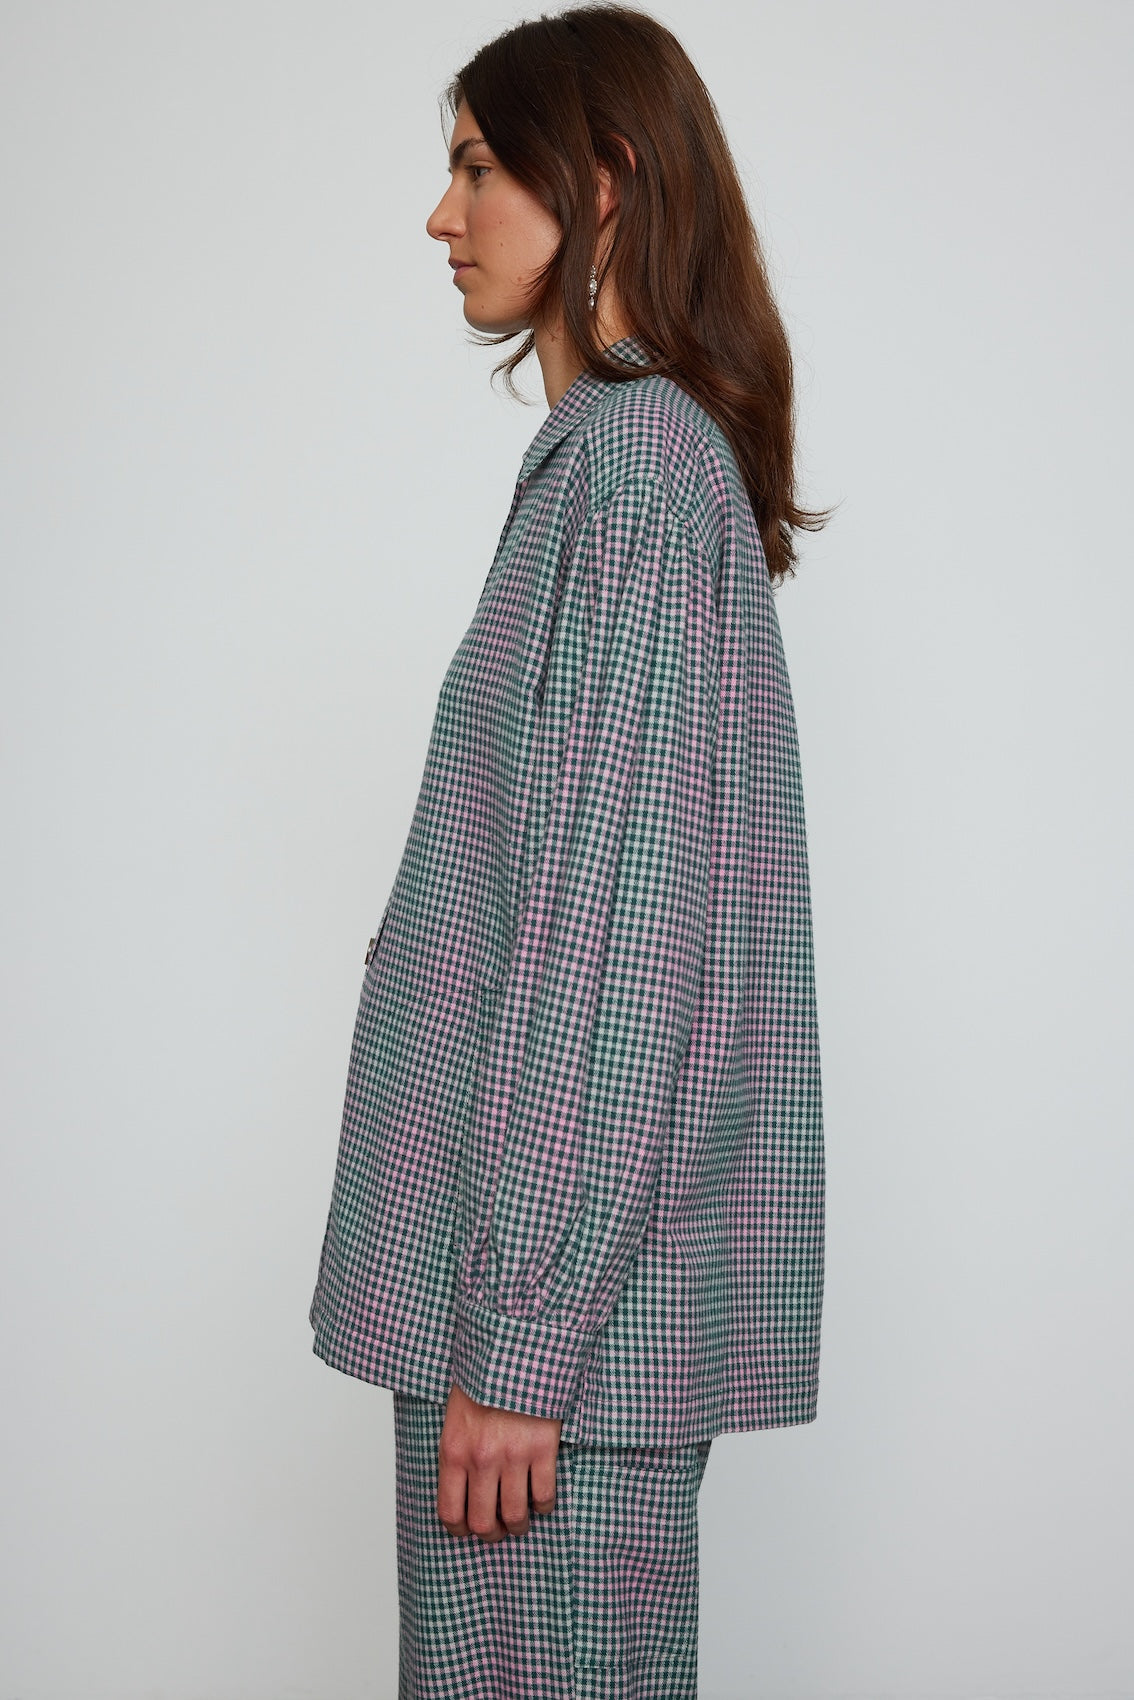 Caro Editions Hannah shirt in soft cotton flannel. The shirt features an oversized fit, big sleeves, and buttons at the front. Style it with matching Hannah pants or jeans, or wear it open over a t-shirt or tank top.